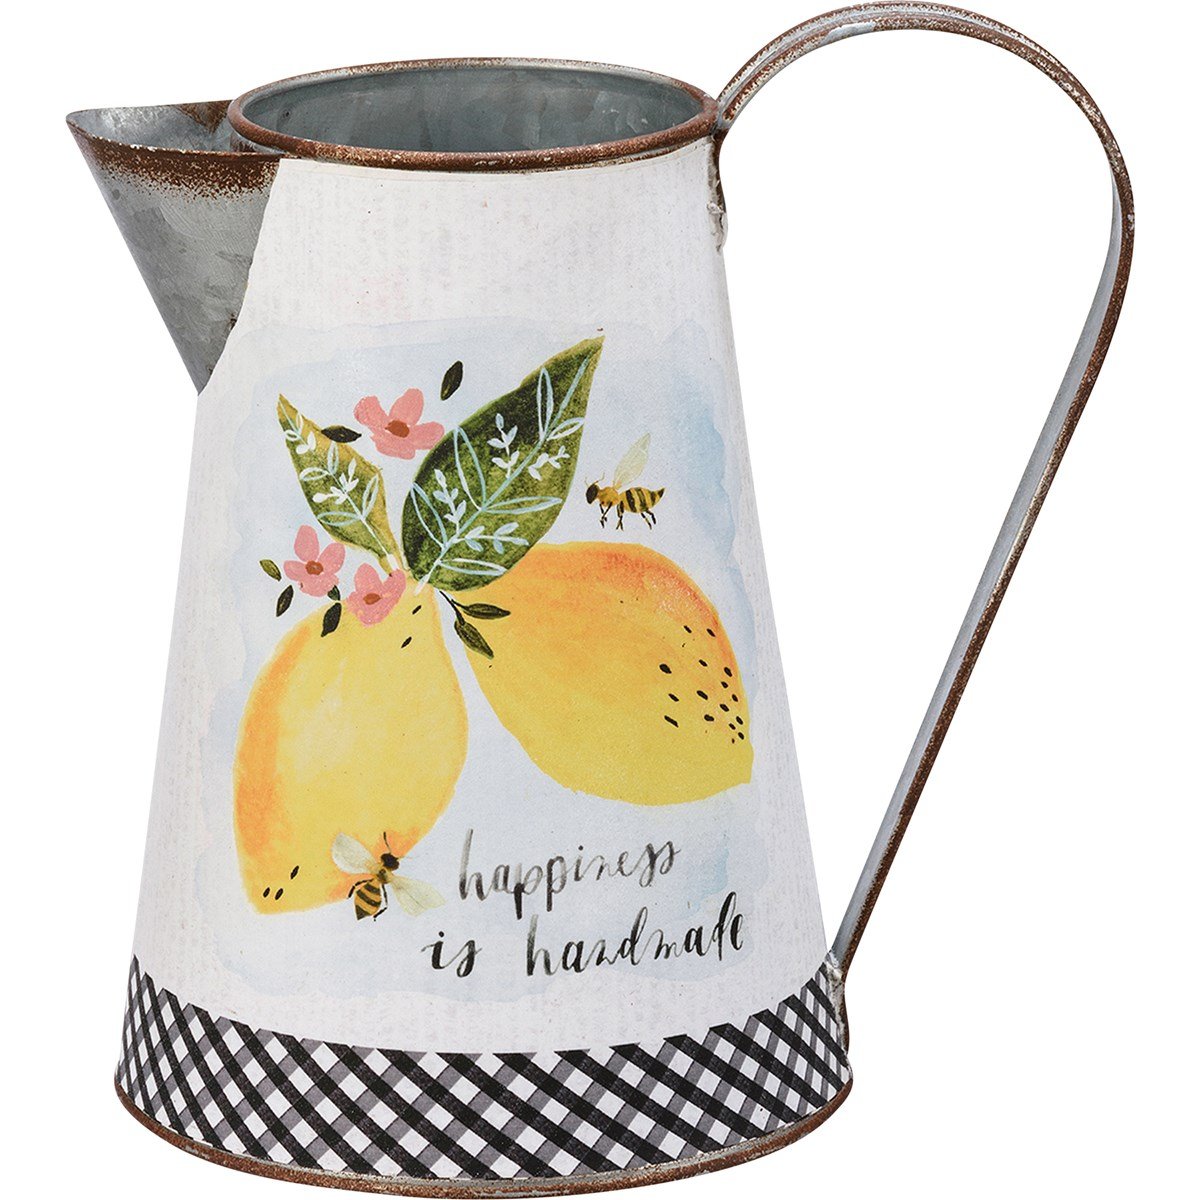 Happiness Is Handmade Pitcher